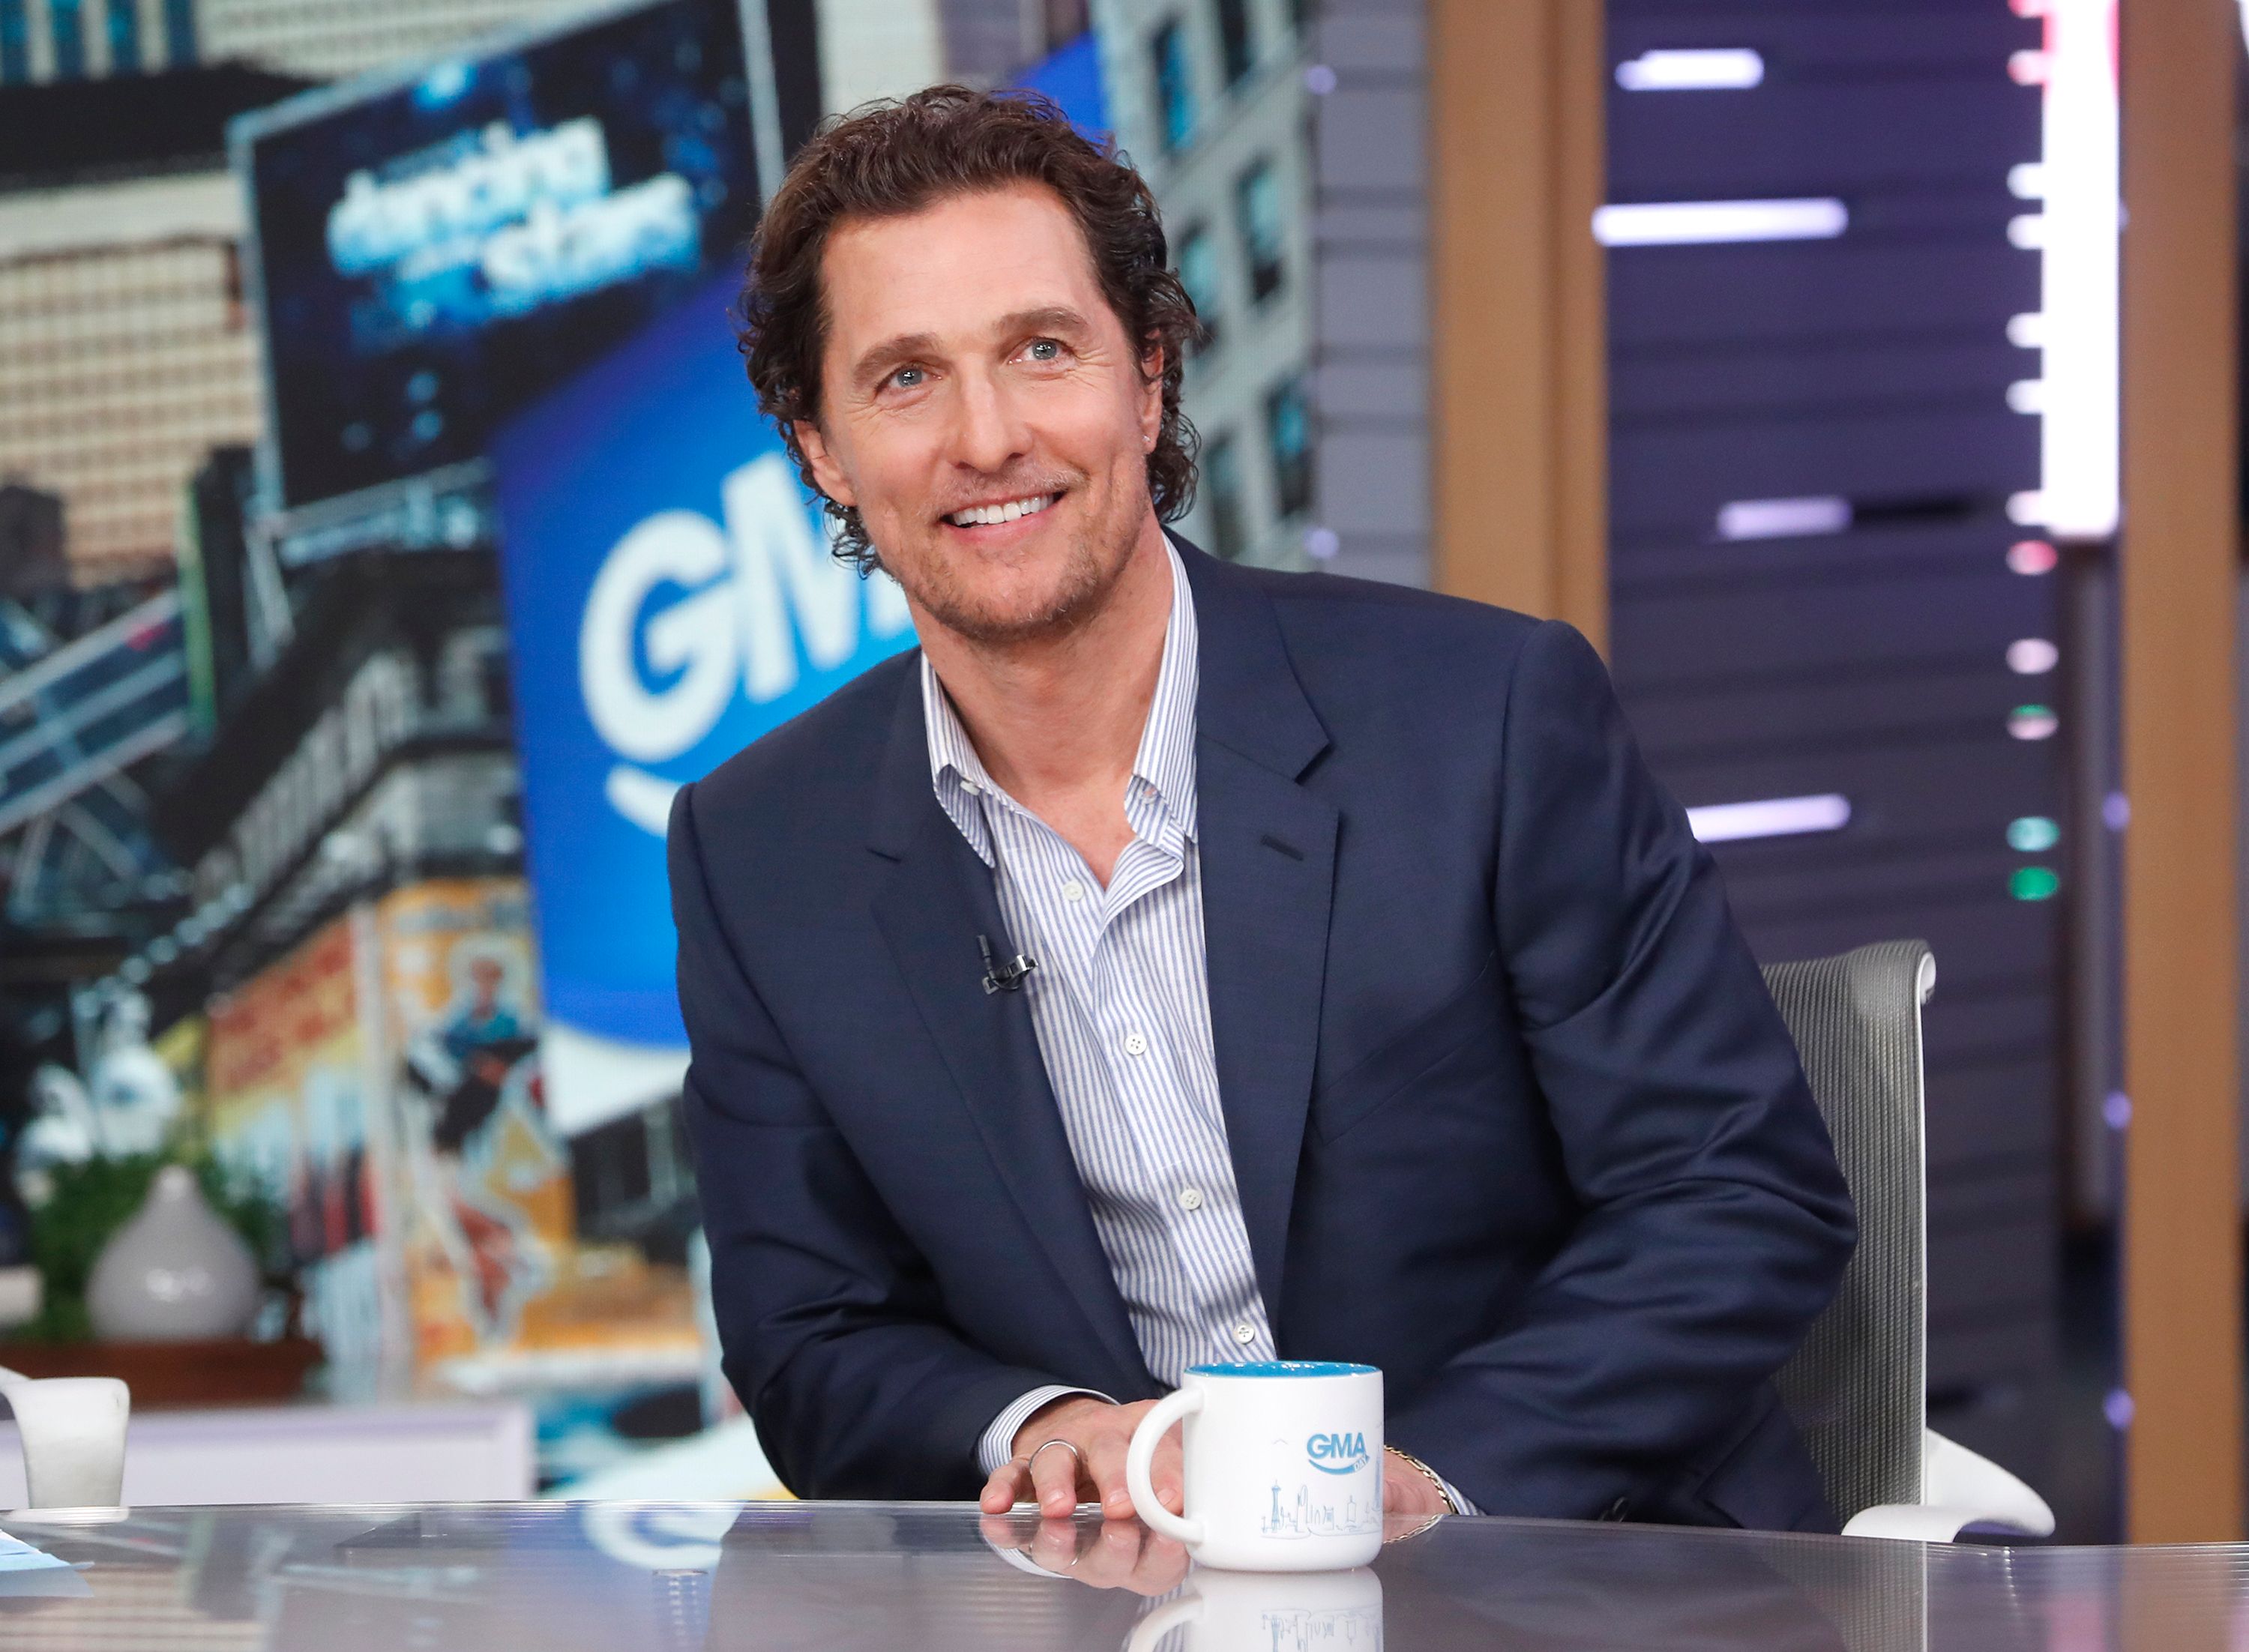 Matthew McConaughey on "GMA Day," on January 24, 2019 | Photo: Lou Rocco/Walt Disney Television/Getty Images